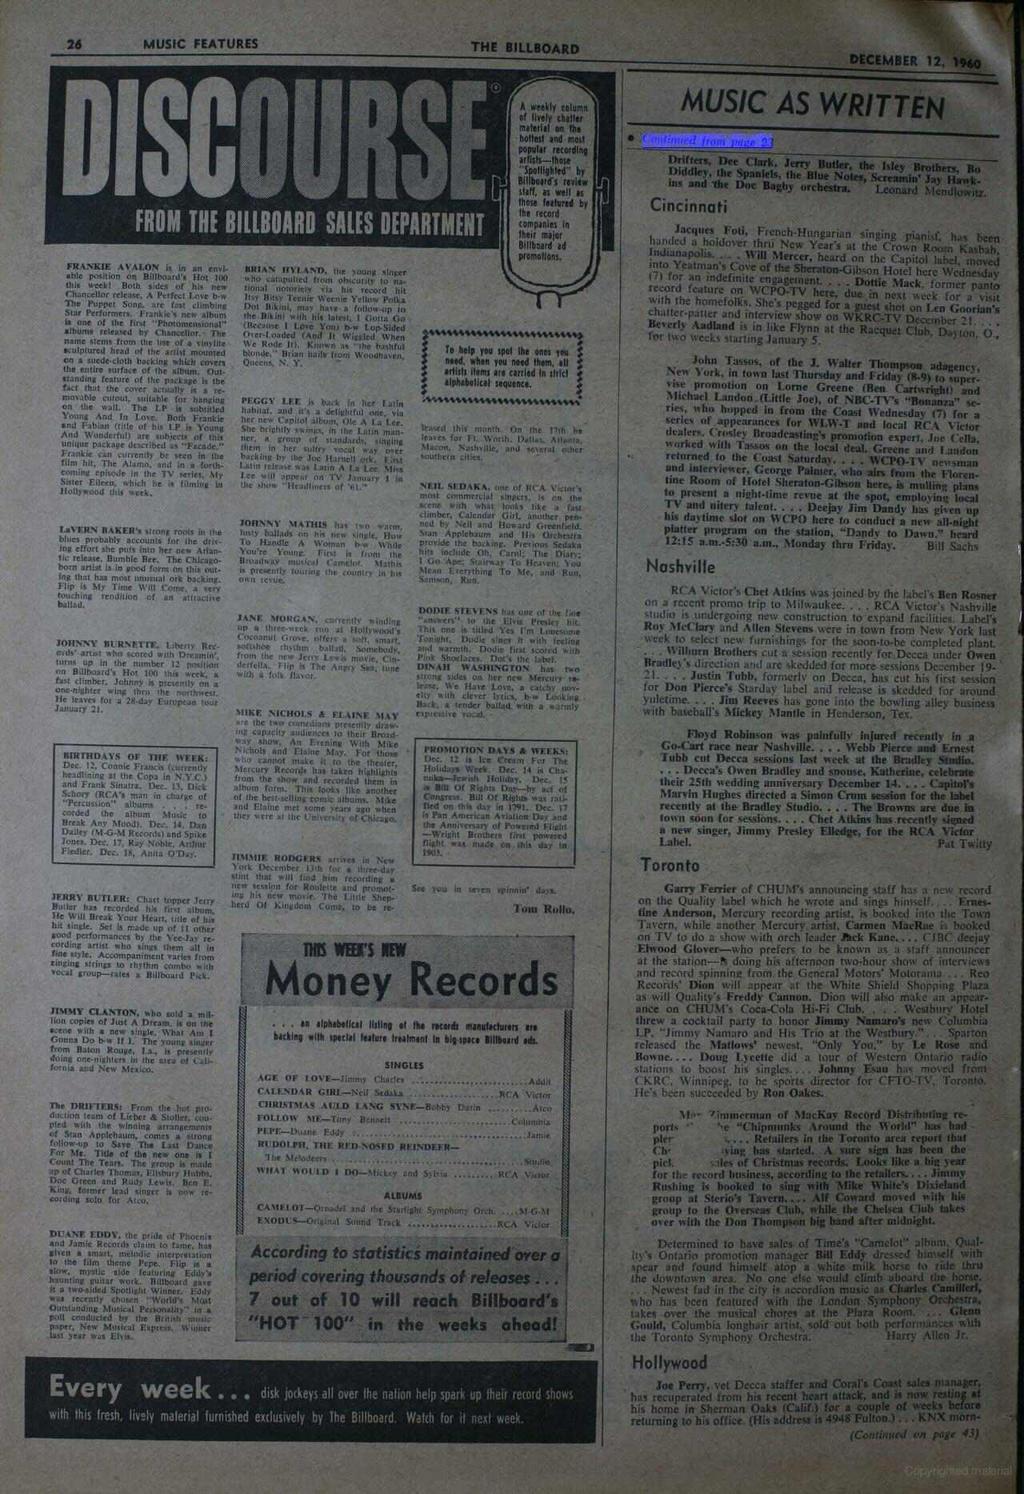 26 MUSIC FEATURES THE BILLBOARD DECEMBER 12, 1960 FROM THE BILLBOARD SALES DEPARTMENT FRANKIE AVALON is in an enviable position on Billboard's Hot 100 this week!